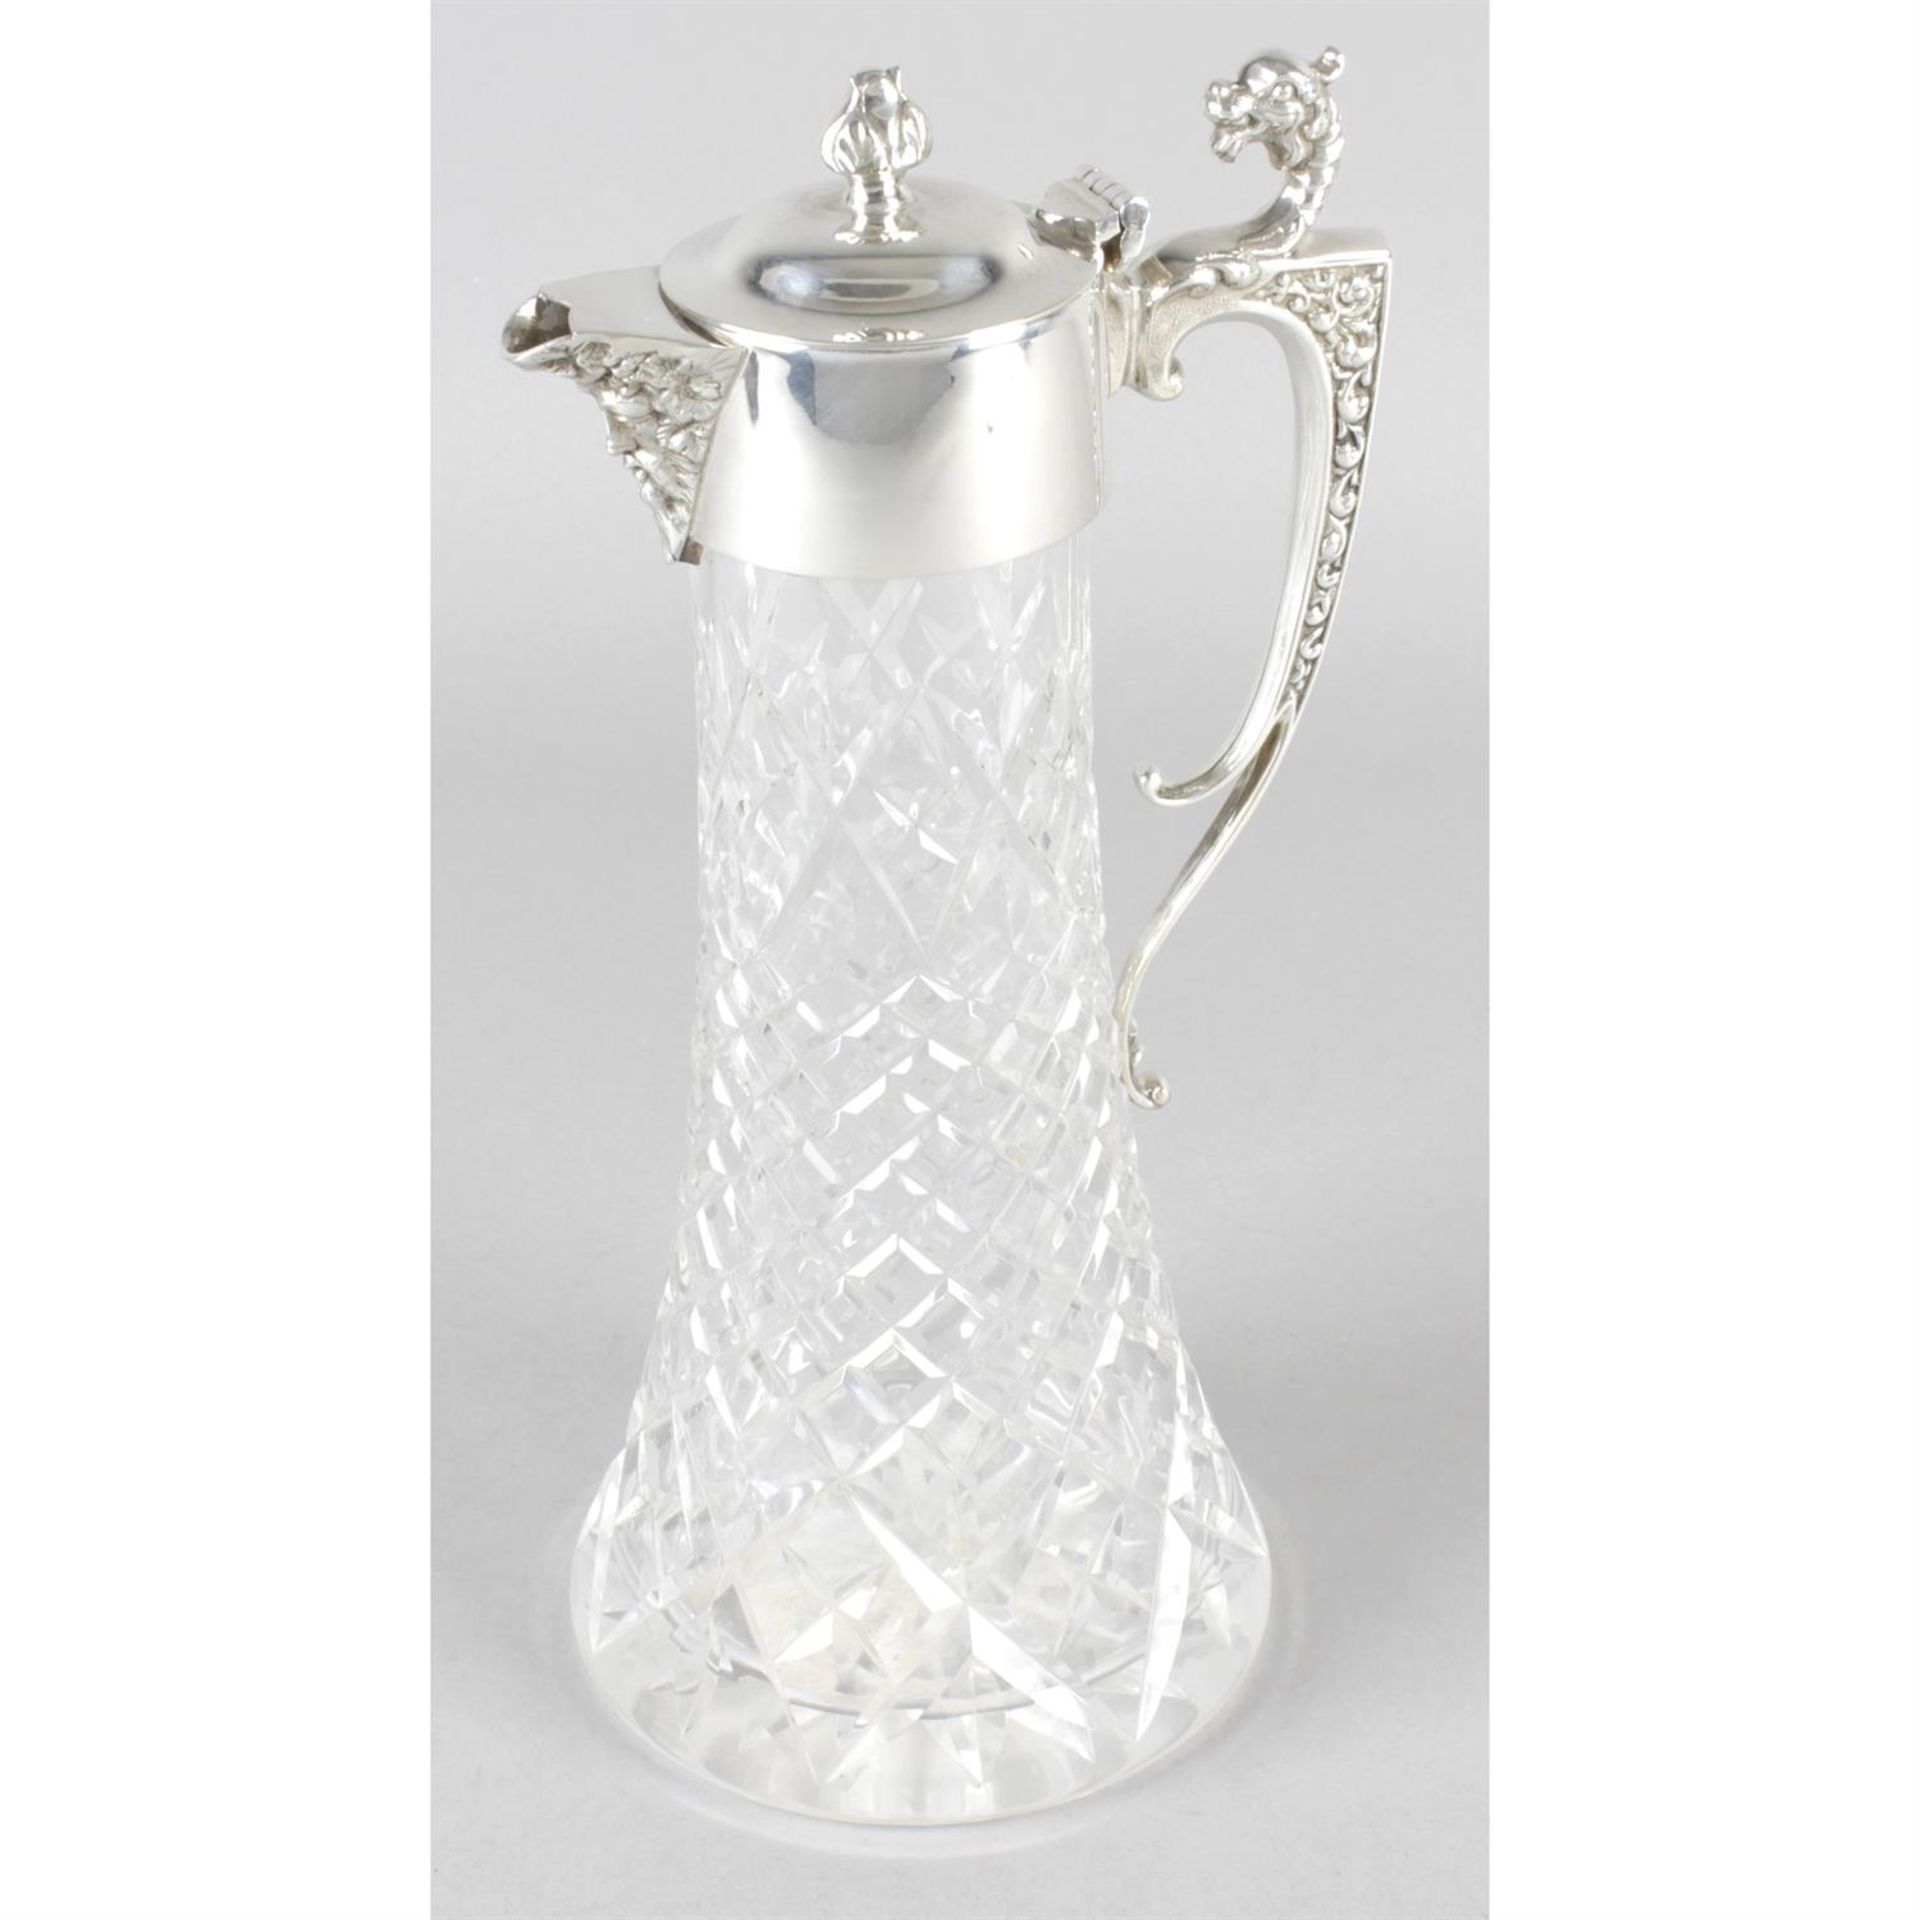 A modern silver mounted and cut glass claret jug.